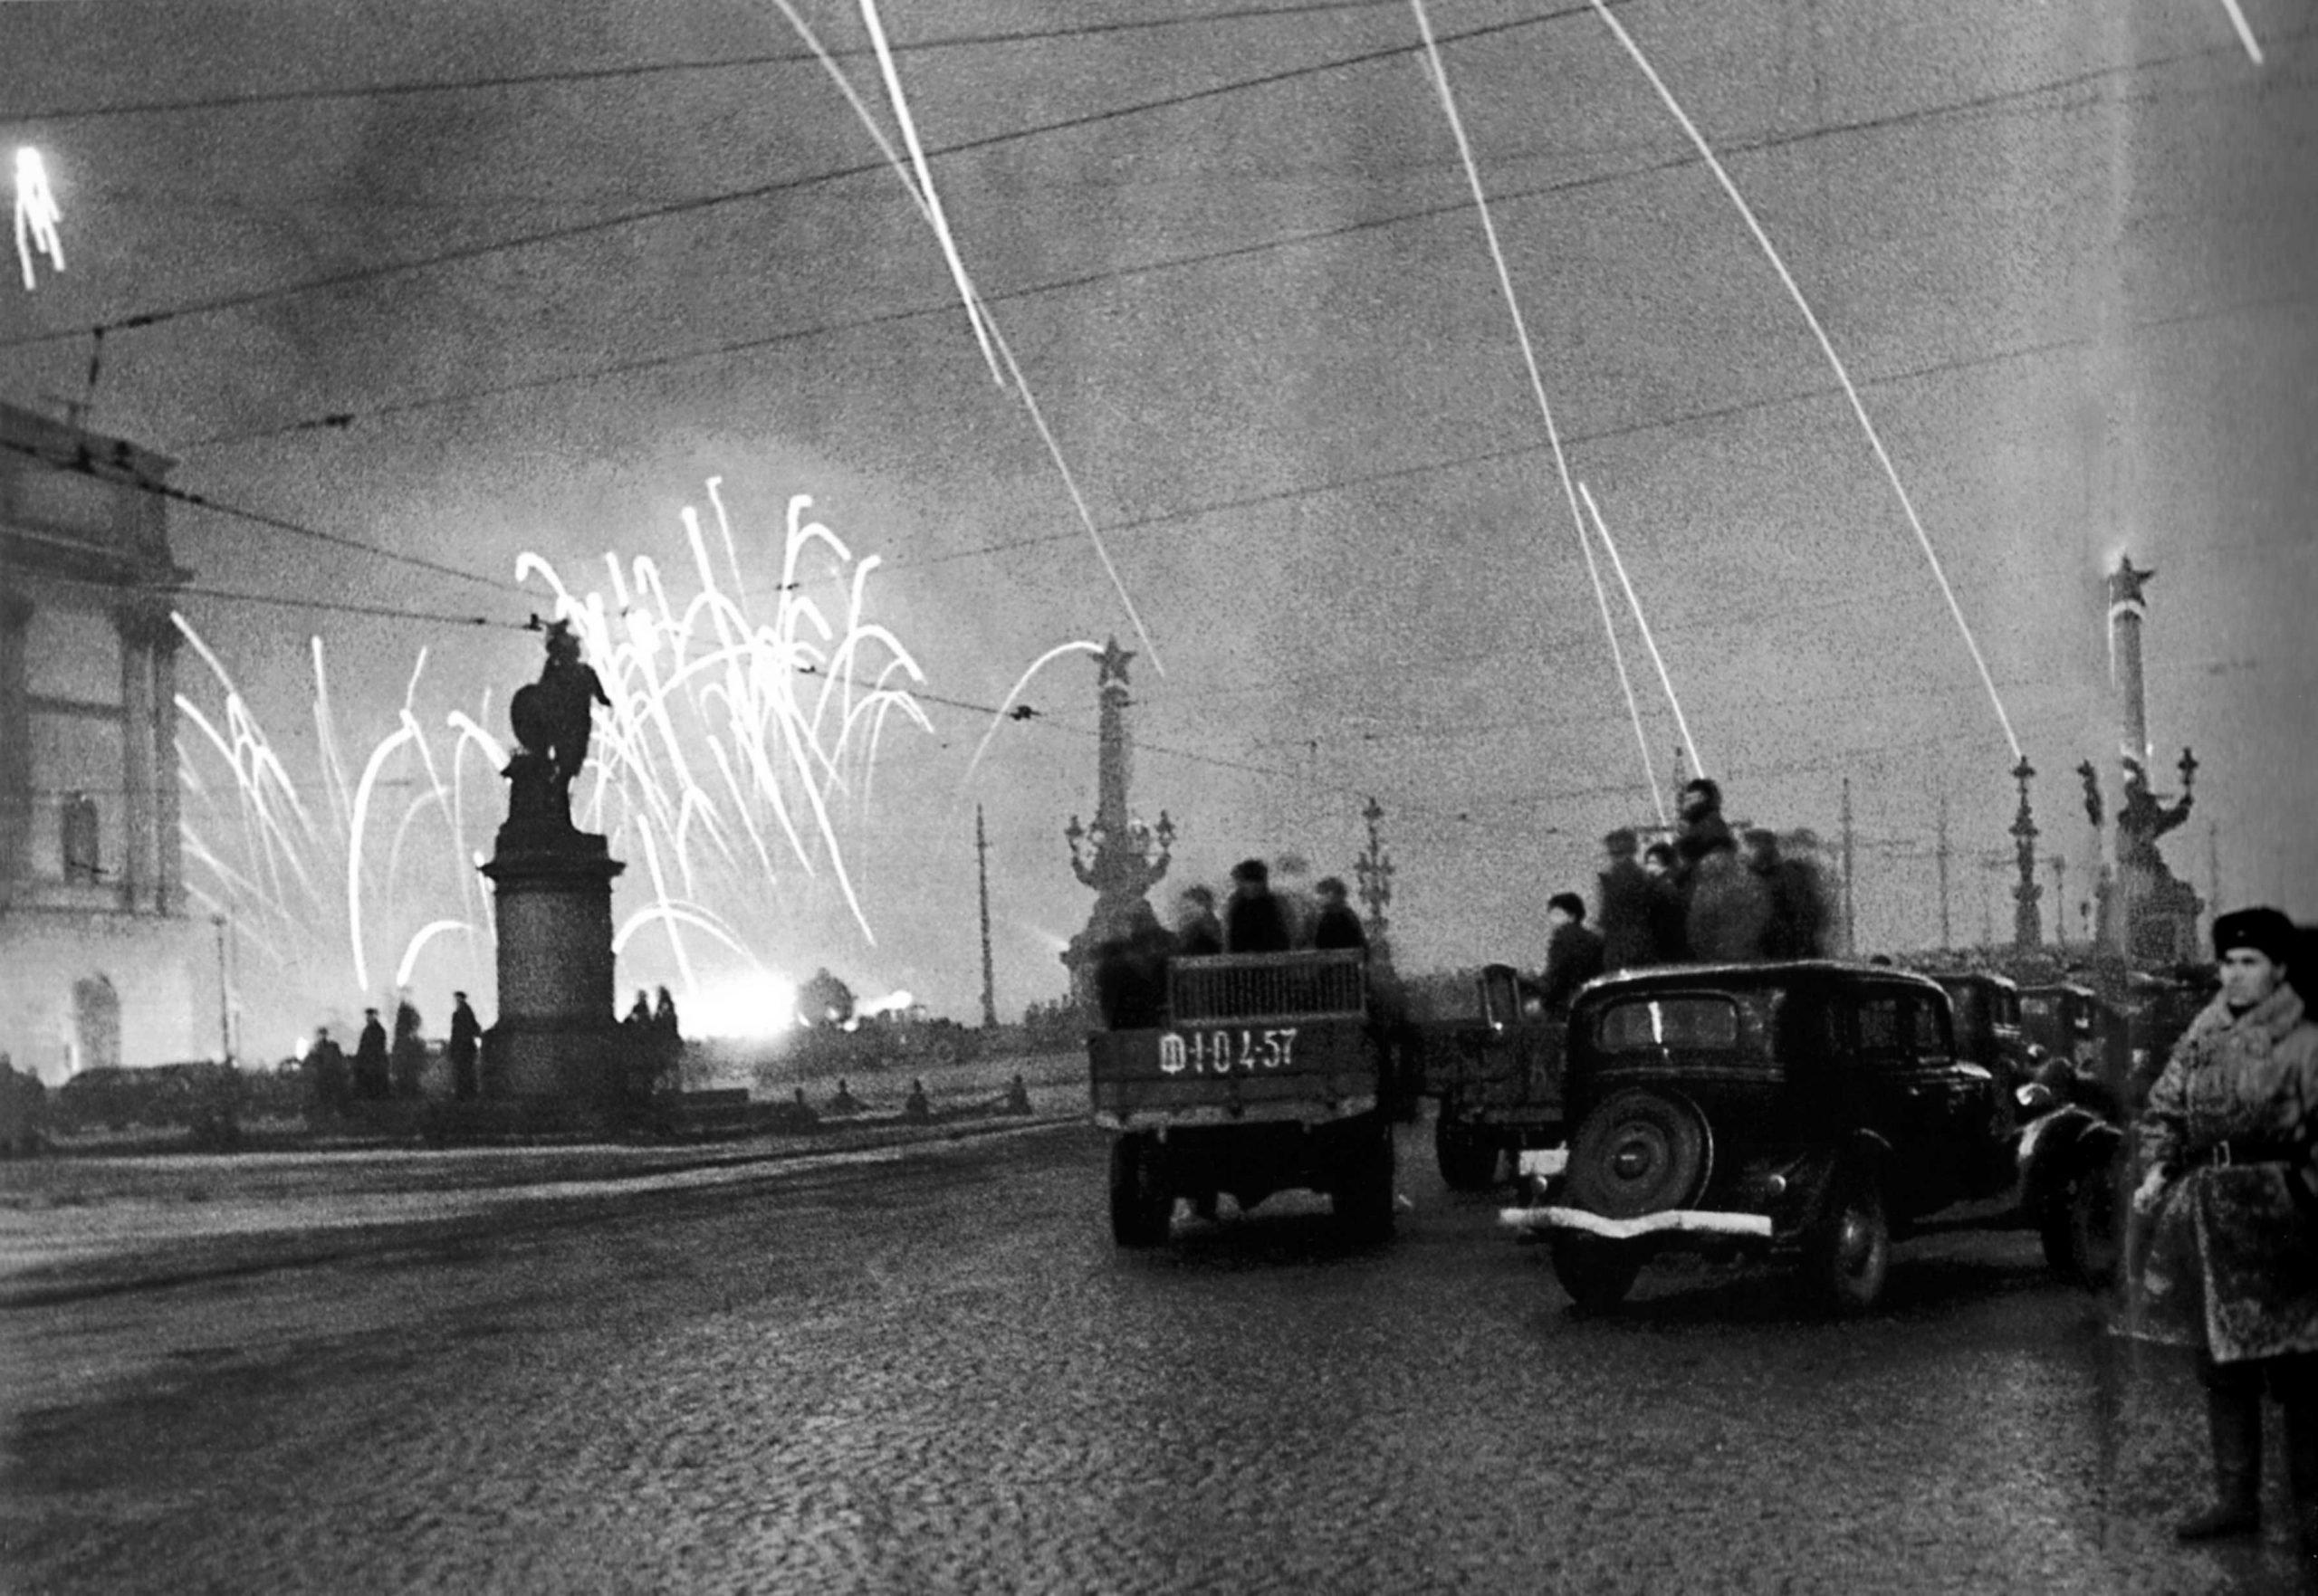 fireworks to commemorate the lifting of the Nazi siege